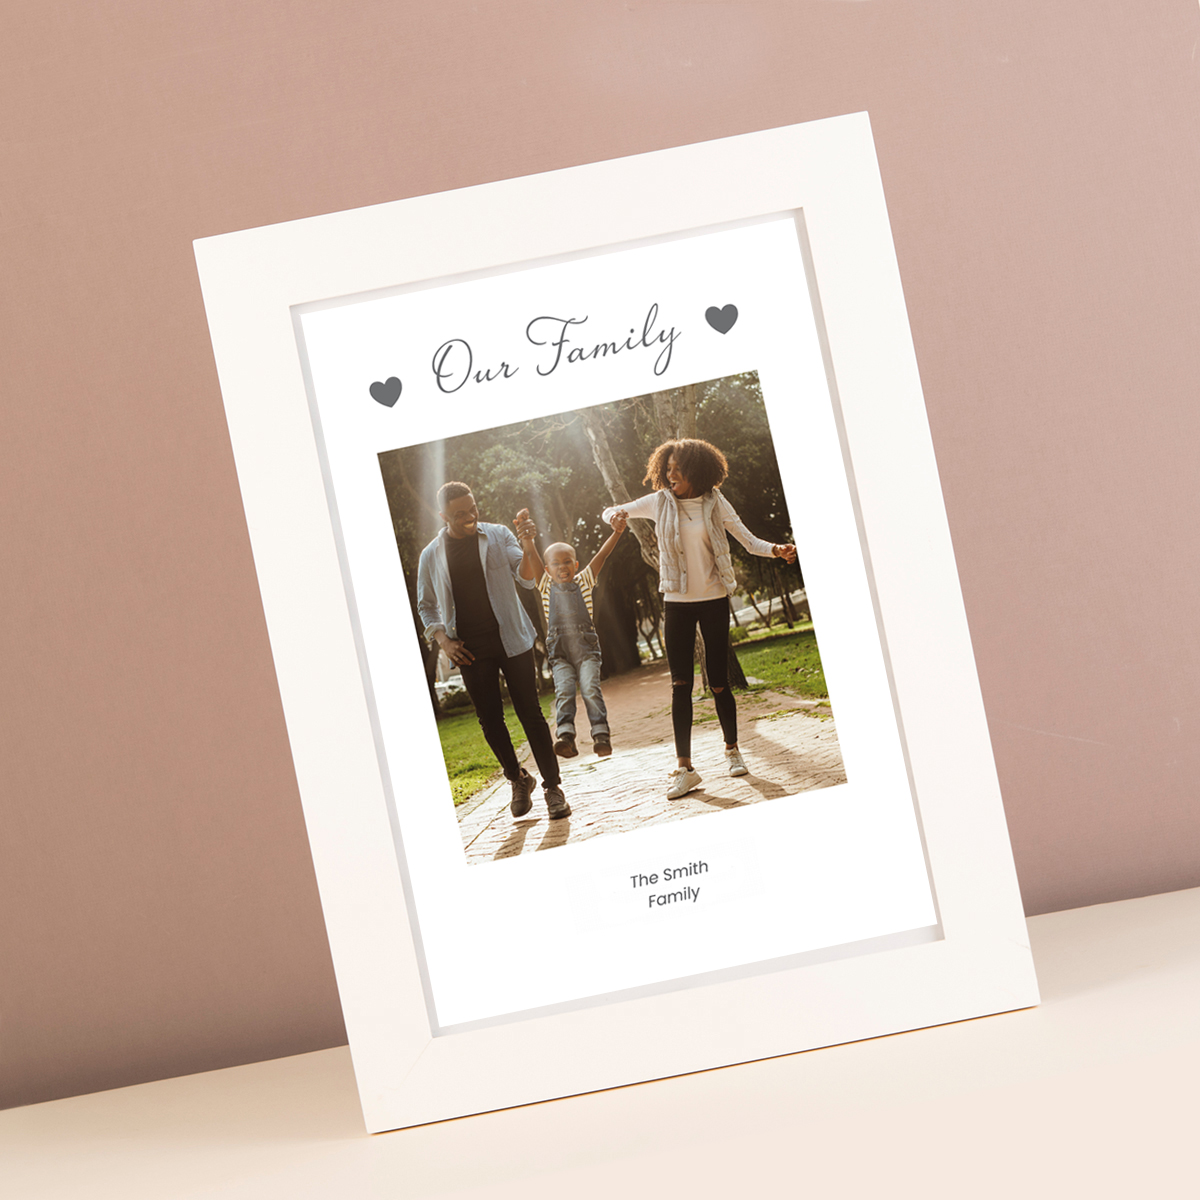 Personalised Our Family Photo Upload Portrait Print